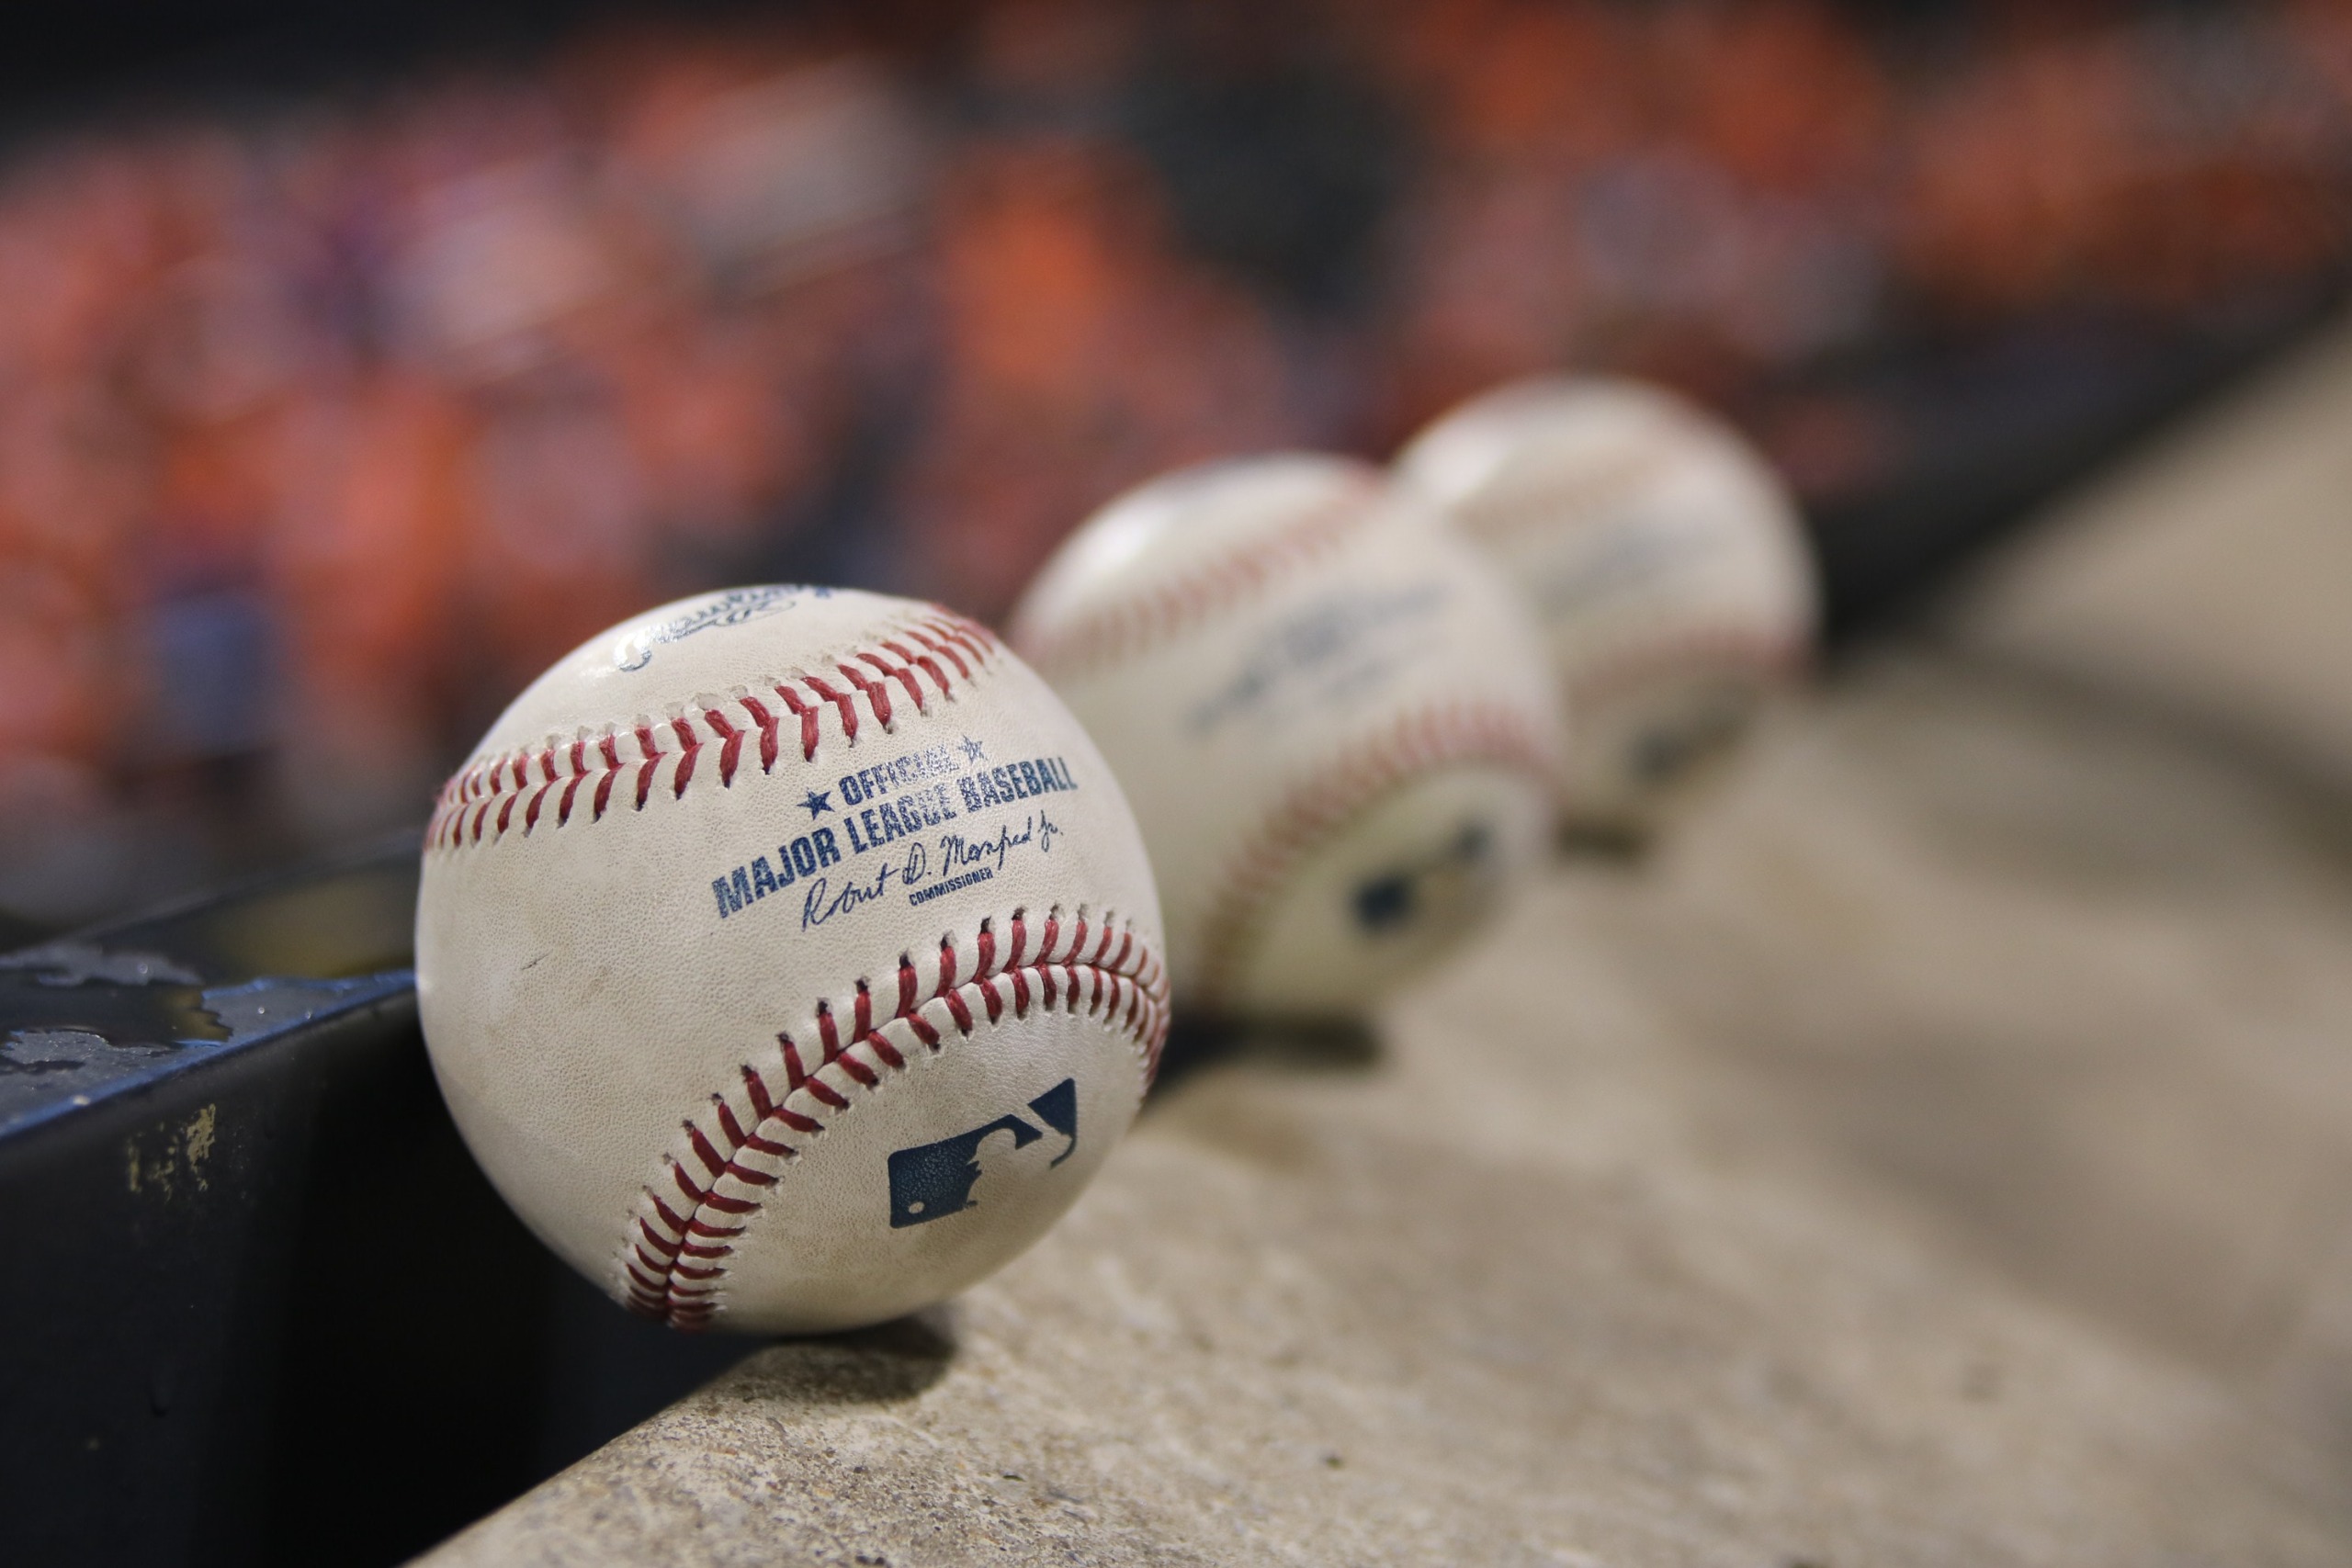 An Orioles Fan Guide to the Camden Yards Experience | ParkMobile